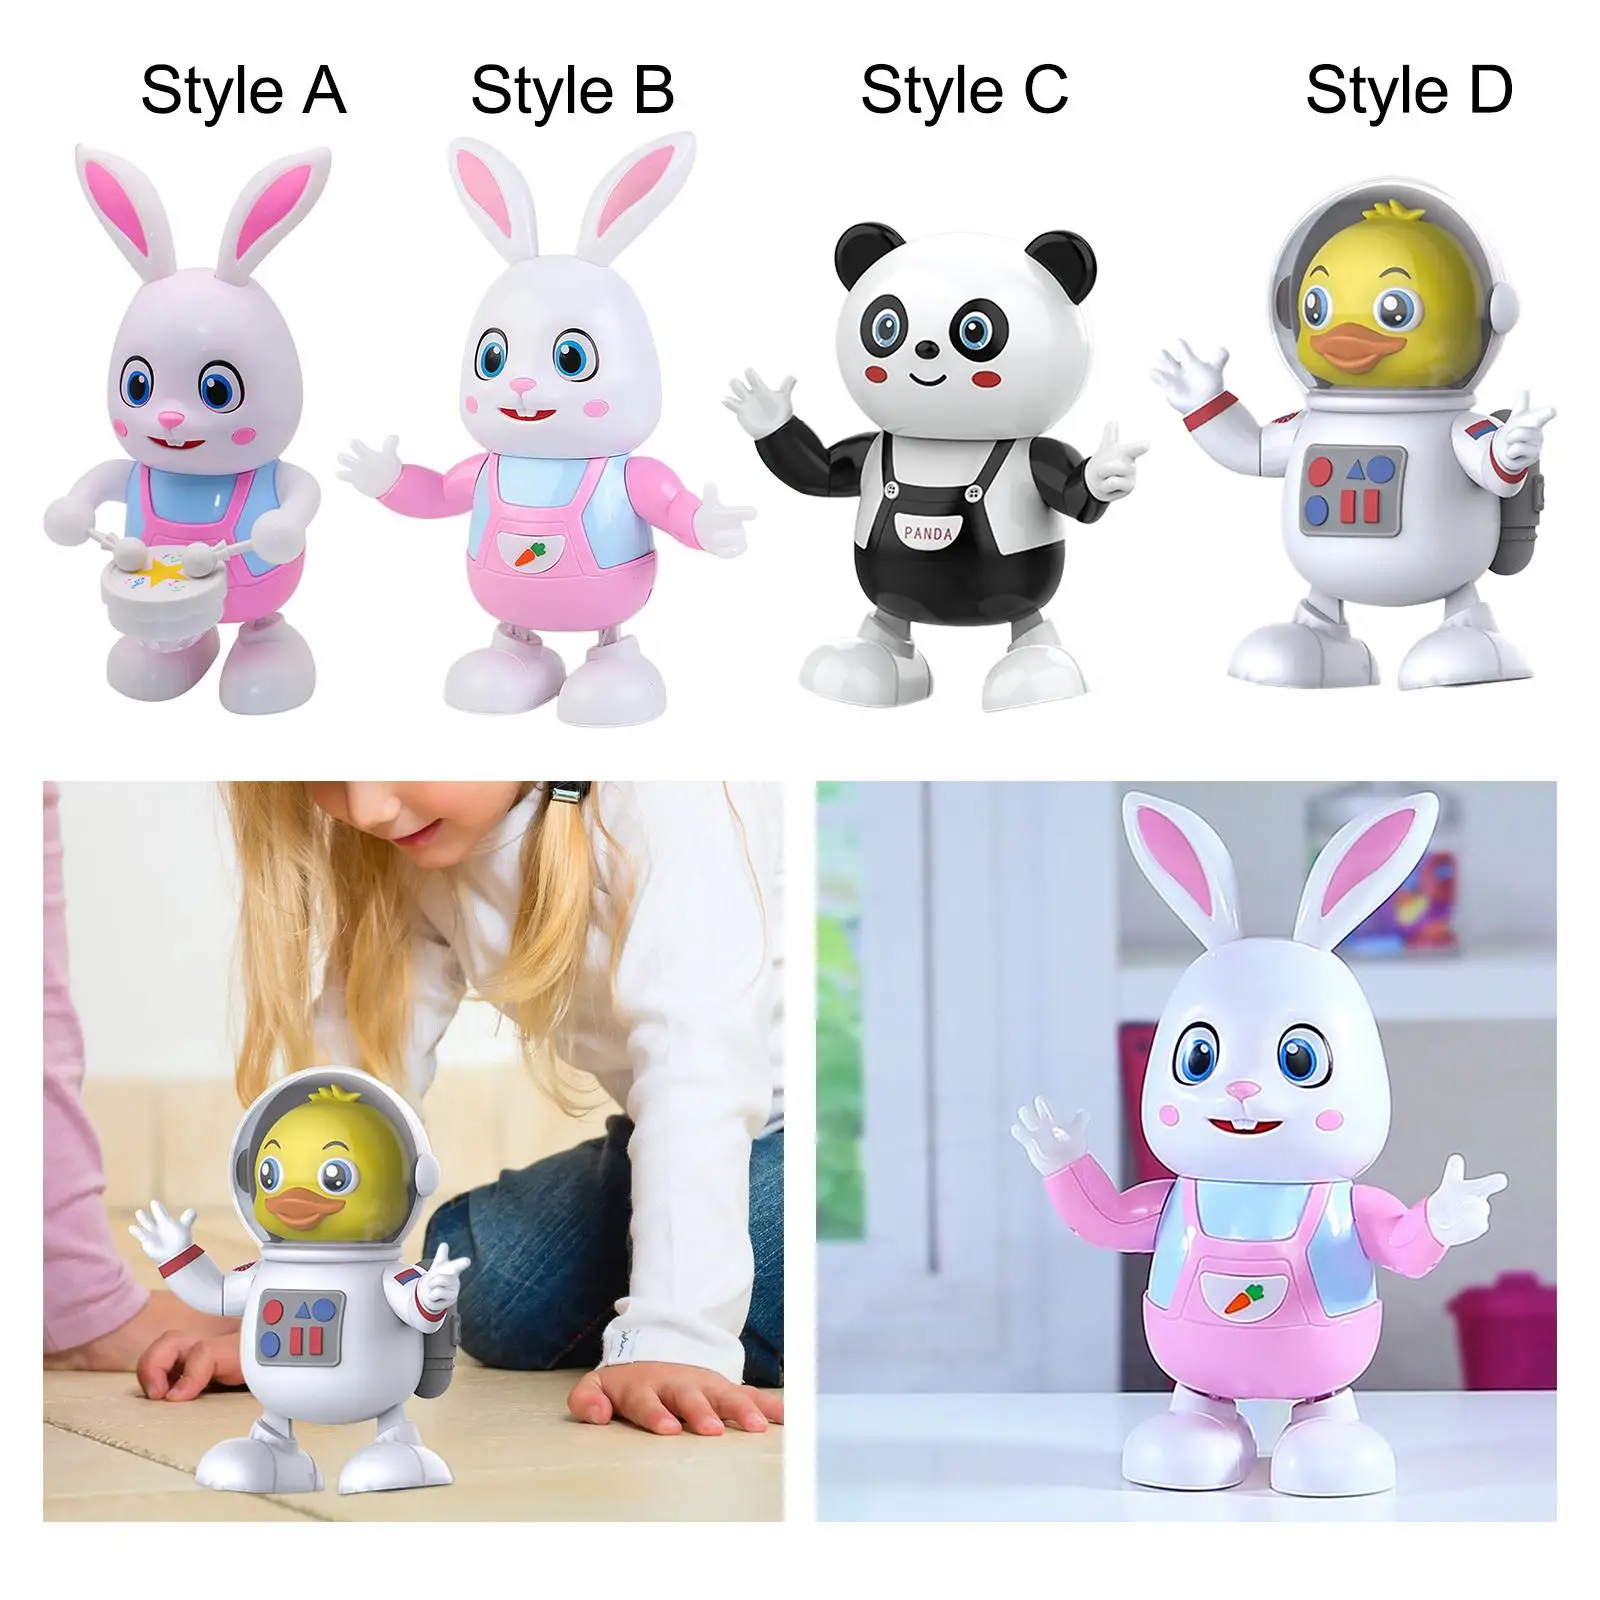 Dancing Walking Toy Funny Cute Learning Decoration Light up Toy Lighting Music Toy Singing Toy for Babies Kids Girls 3+ Year Old